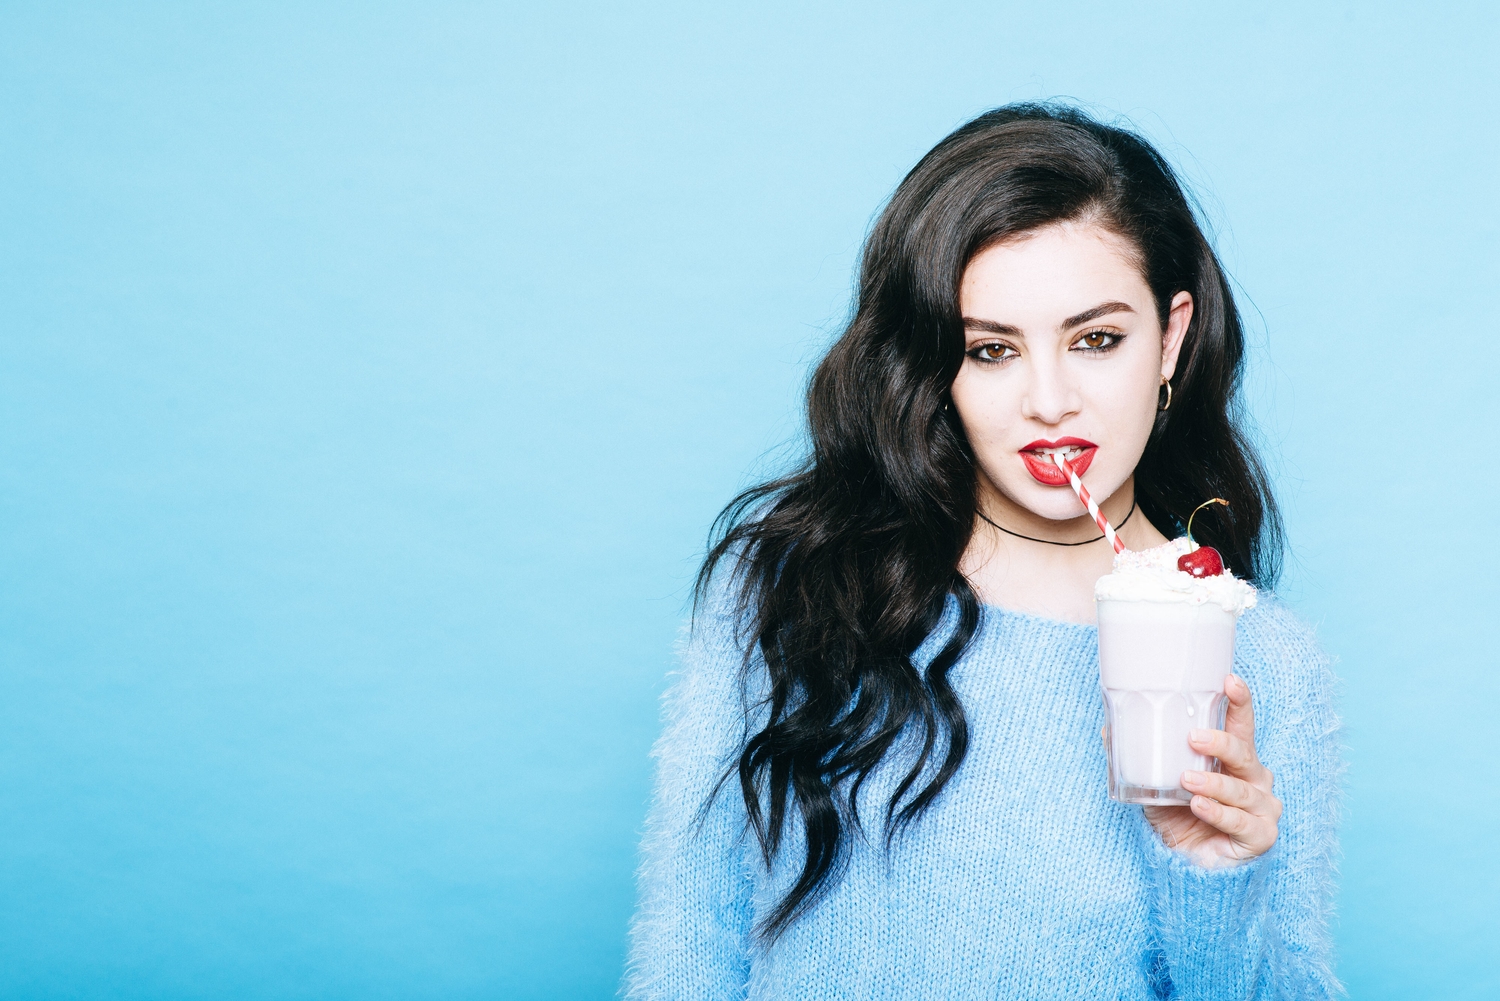 ​Charli XCX: "I feel like an ice cube floating around in a sea of chill"